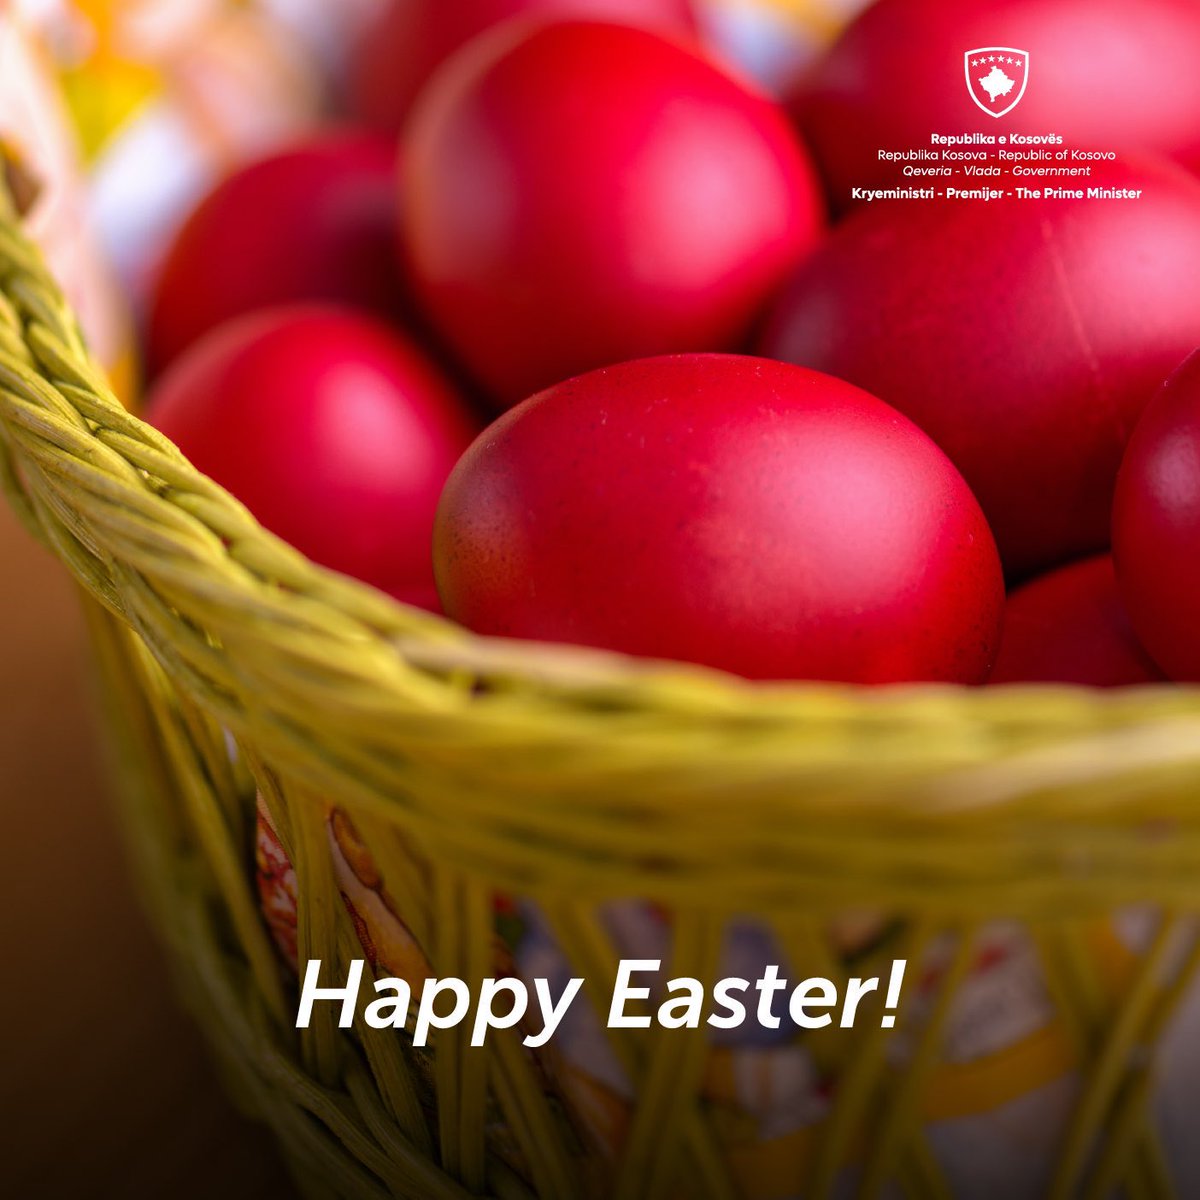 Happy Orthodox Easter to all celebrating. May this day be filled with joy, hope and harmony.